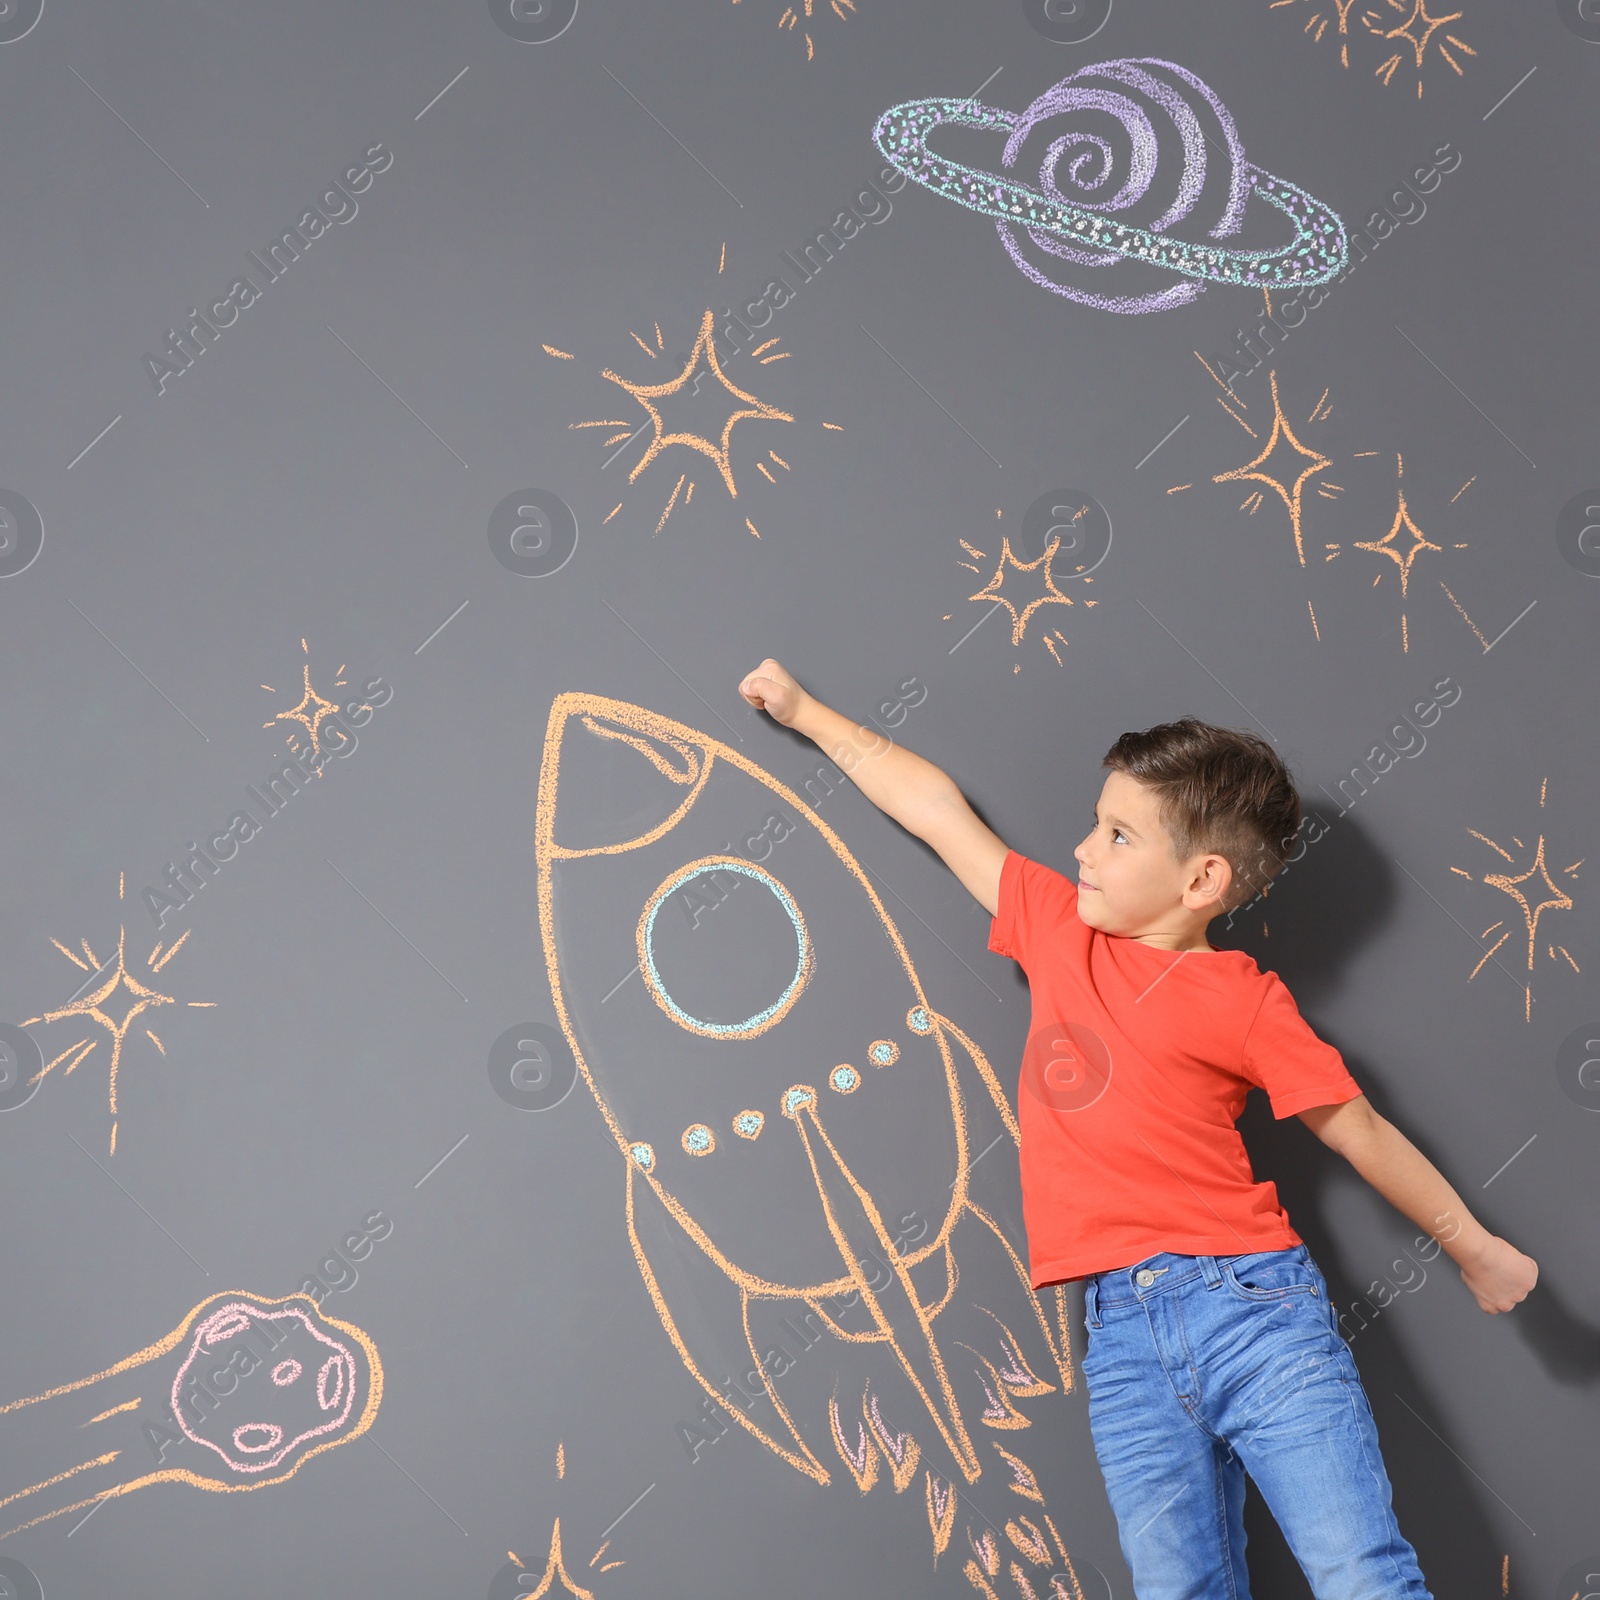 Photo of Cute little child playing with chalk rocket drawing on grey background